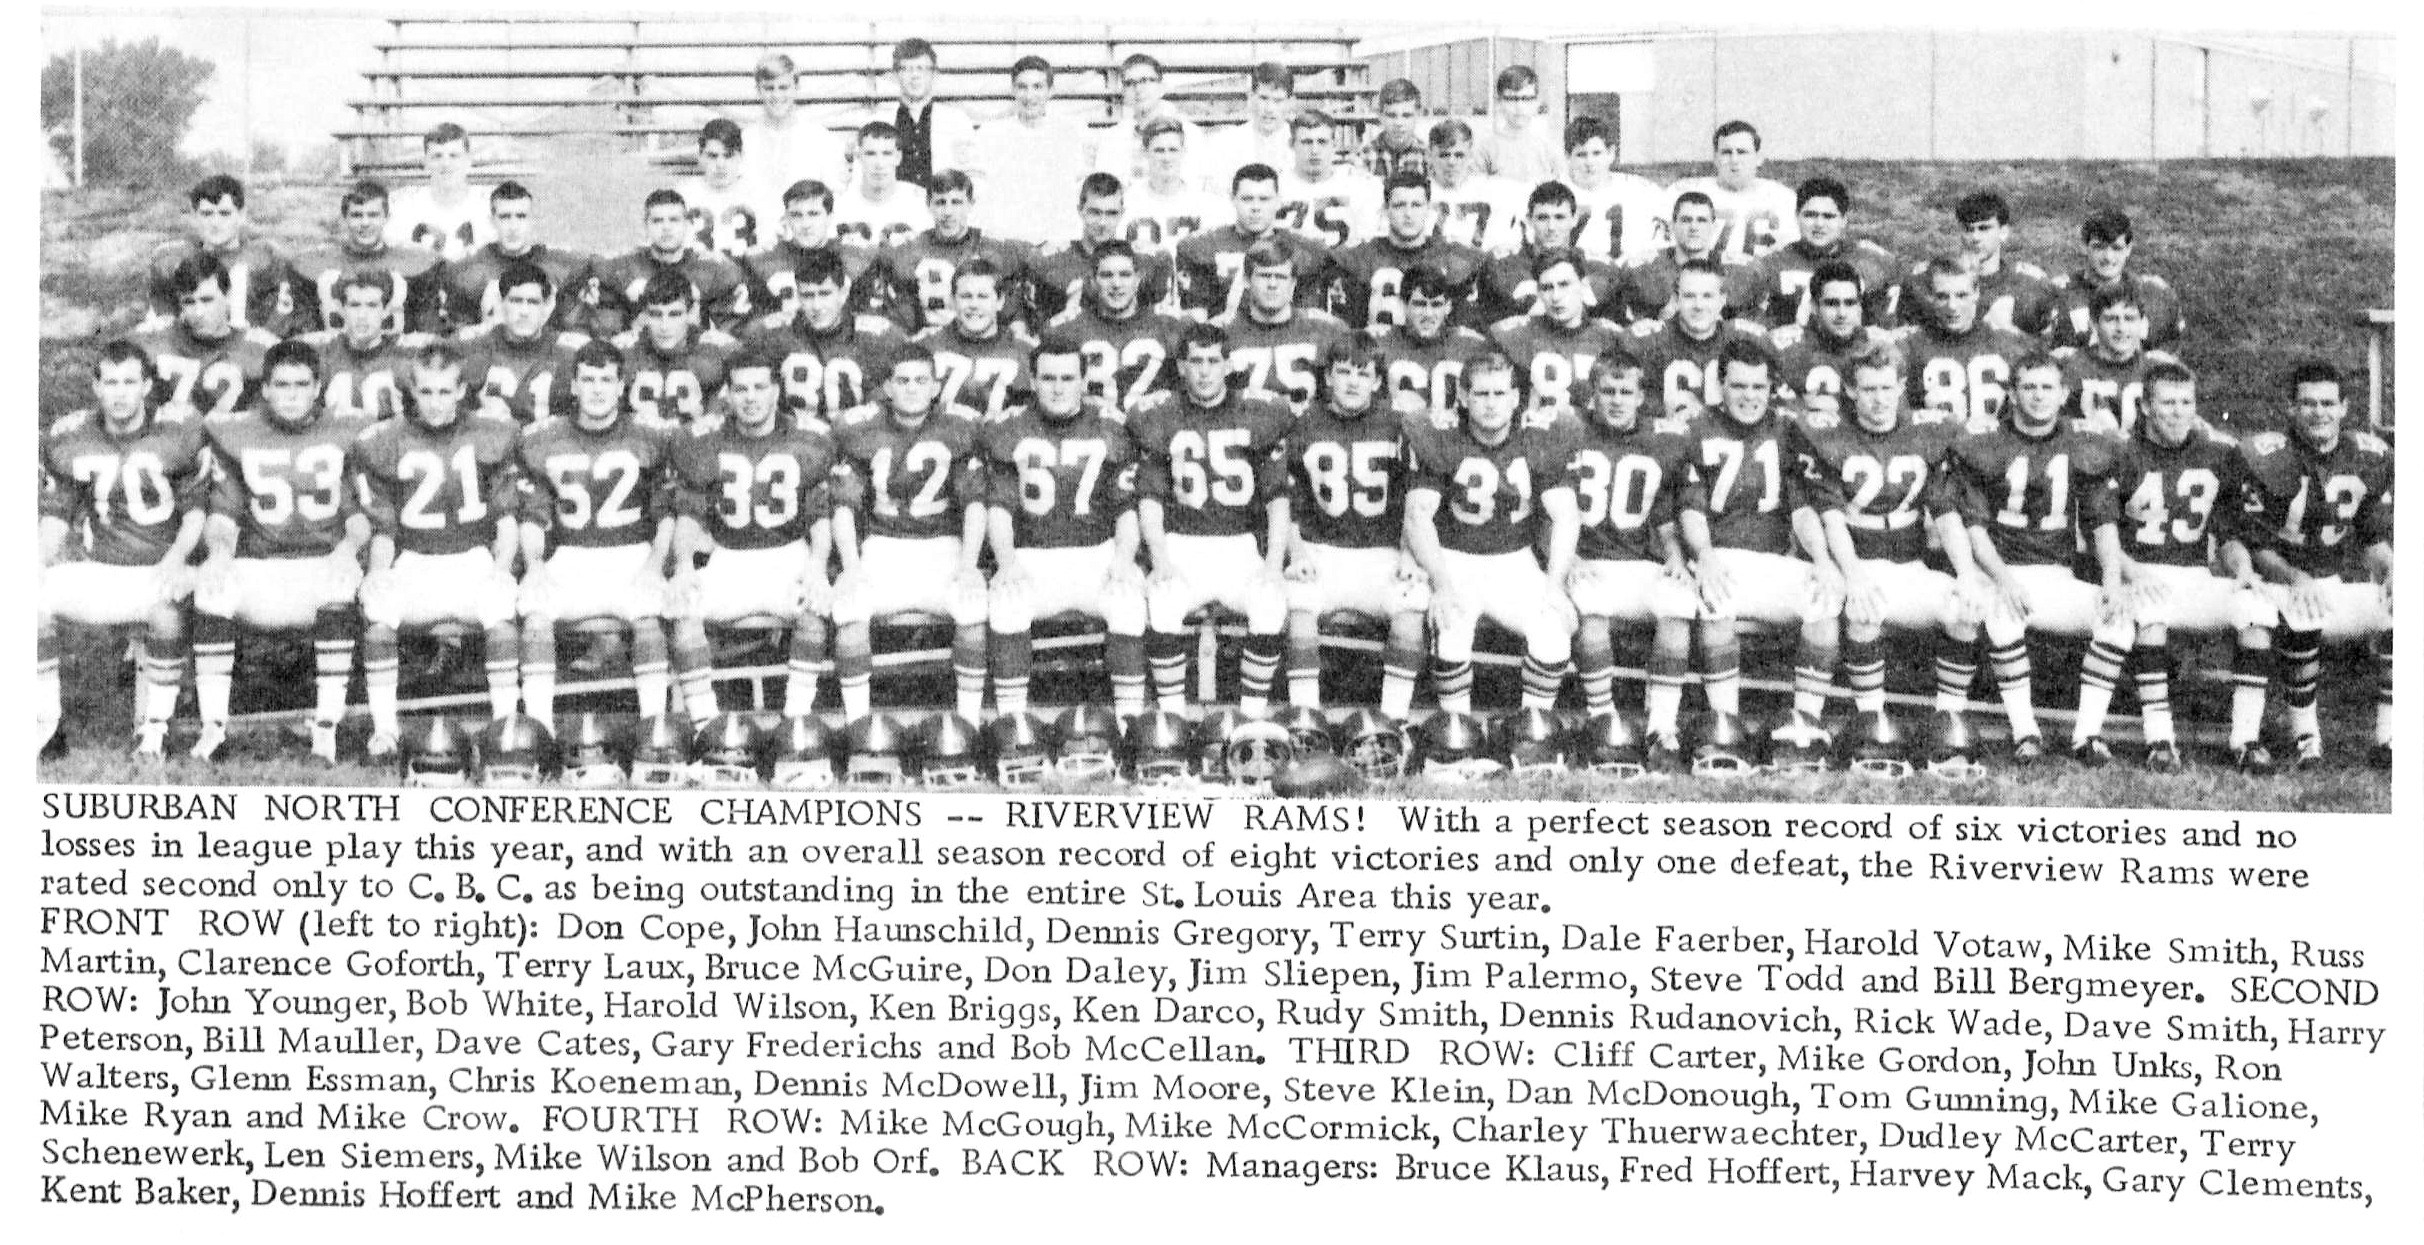 RIVERVIEW RAMS: SUBURBAN NORTH CONFERENCE FOOTBALL CHAMPIONS!! Sophomores Dennis Hoffert and Mike McPherson (top row, right) were Managers. PROM MAGAZINE DECEMBER 1966 